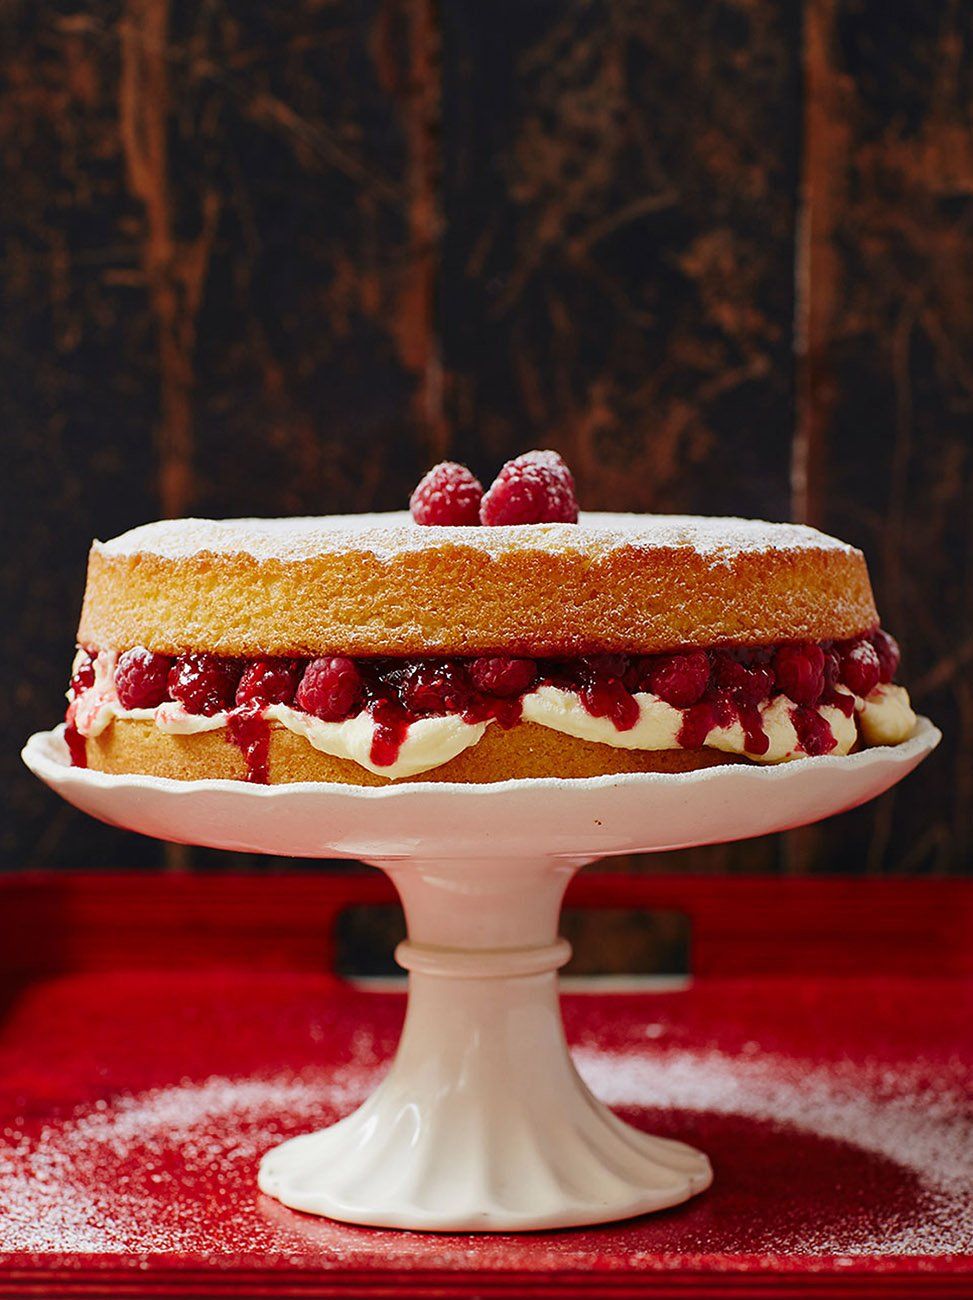 50 of our favourite dessert recipes from Jamie Oliver